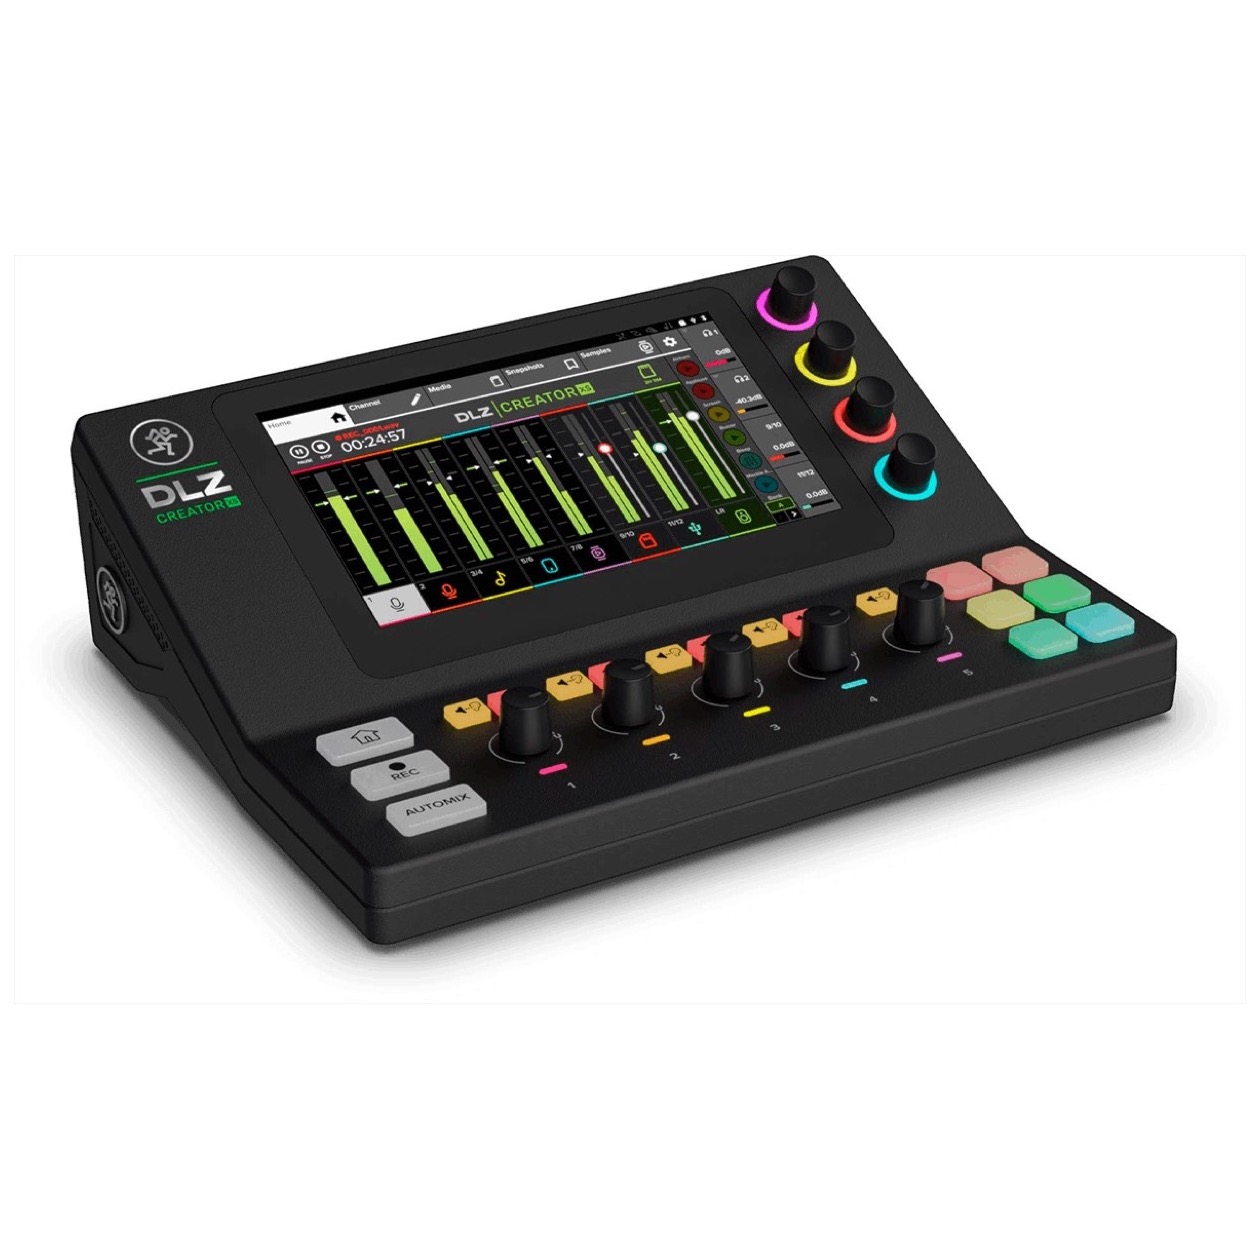 Mackie DLZ Creator XS compact and adaptive digital mixer for podcasting and streaming, featuring Mix Agent technology